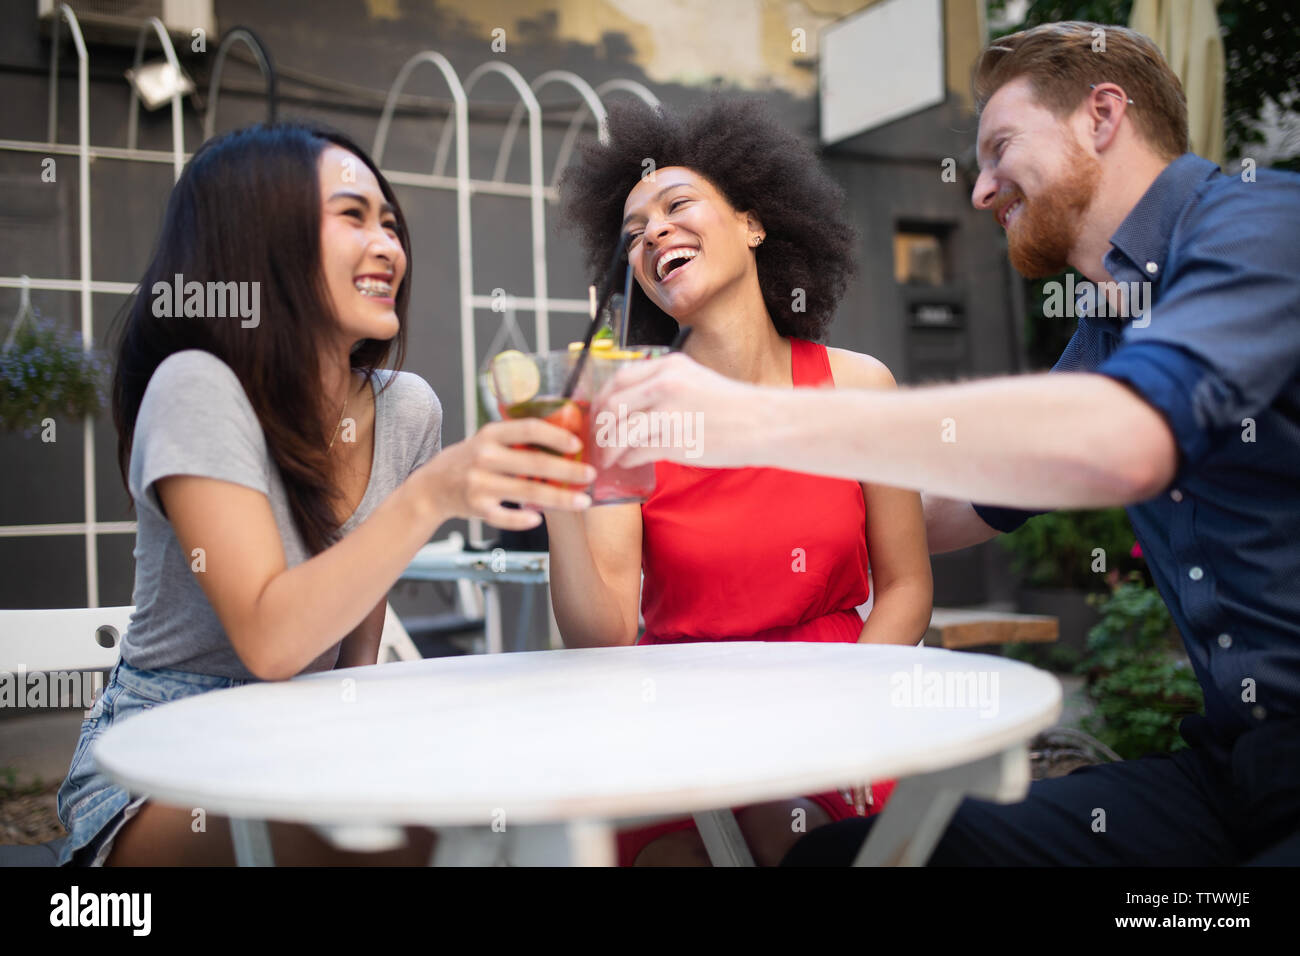 Group of friends having fun together. People talking laughing and enjoying their time Stock Photo